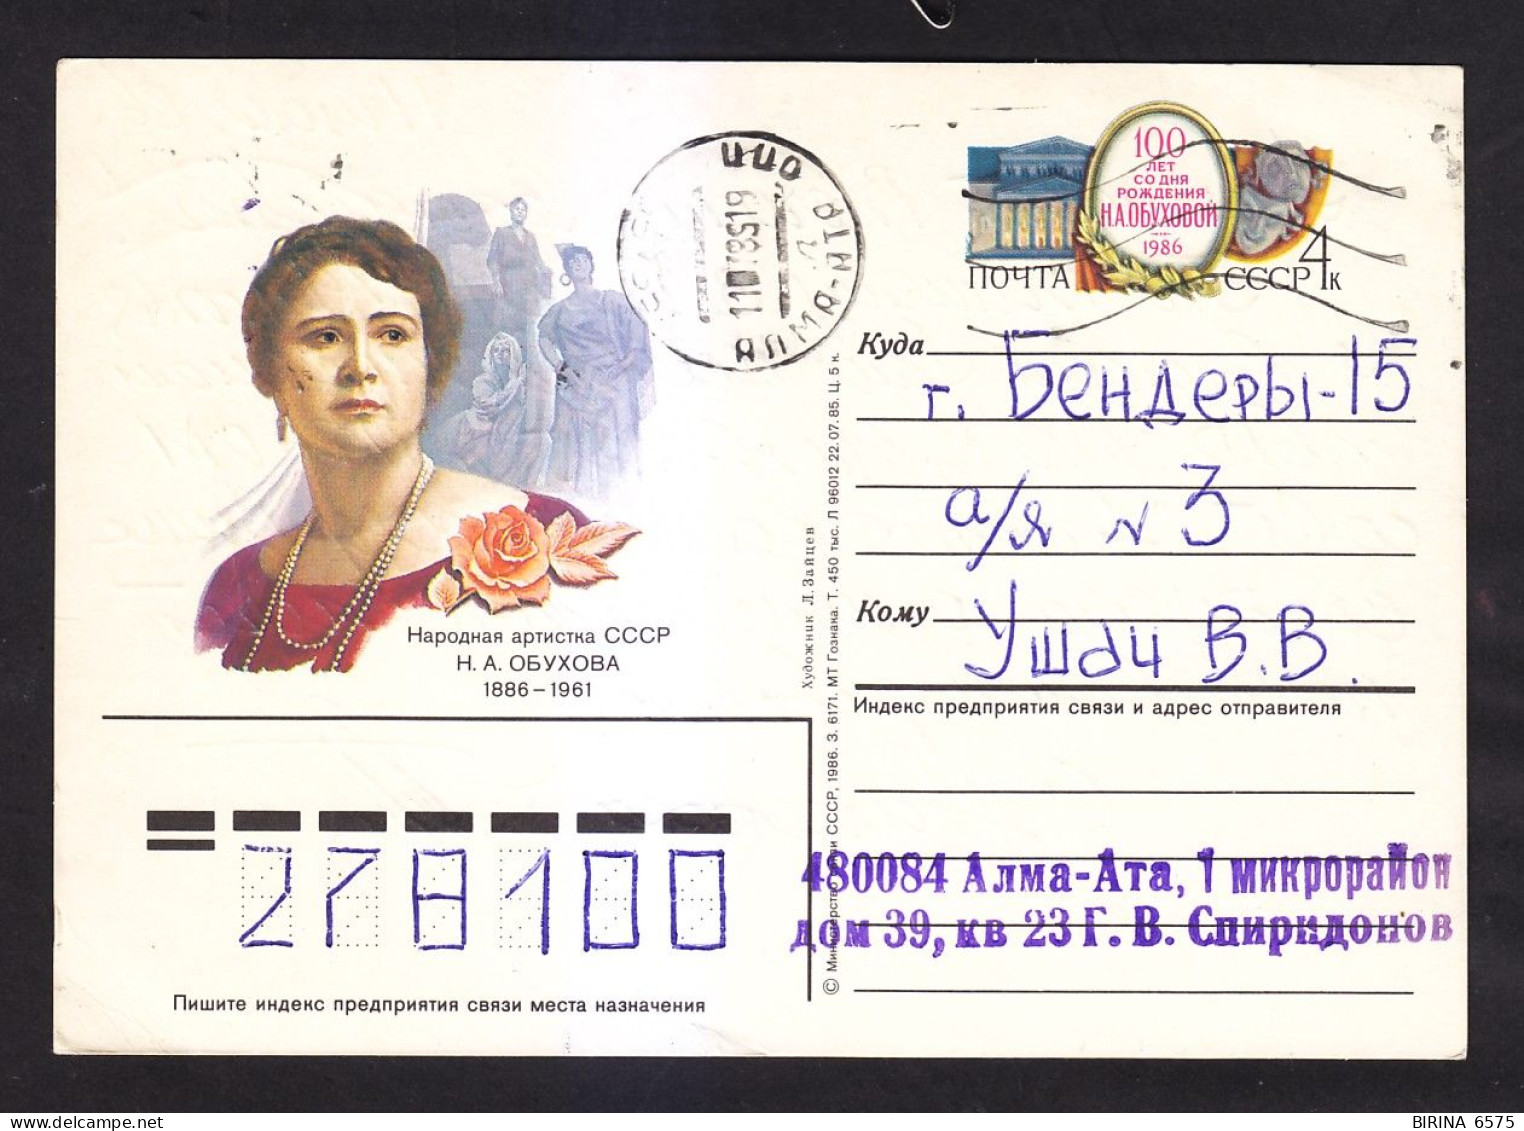 A POSTCARD. The USSR. PEOPLE'S ARTIST OF N. A. OBUKHOVA. Mail. - 9-48 - Covers & Documents